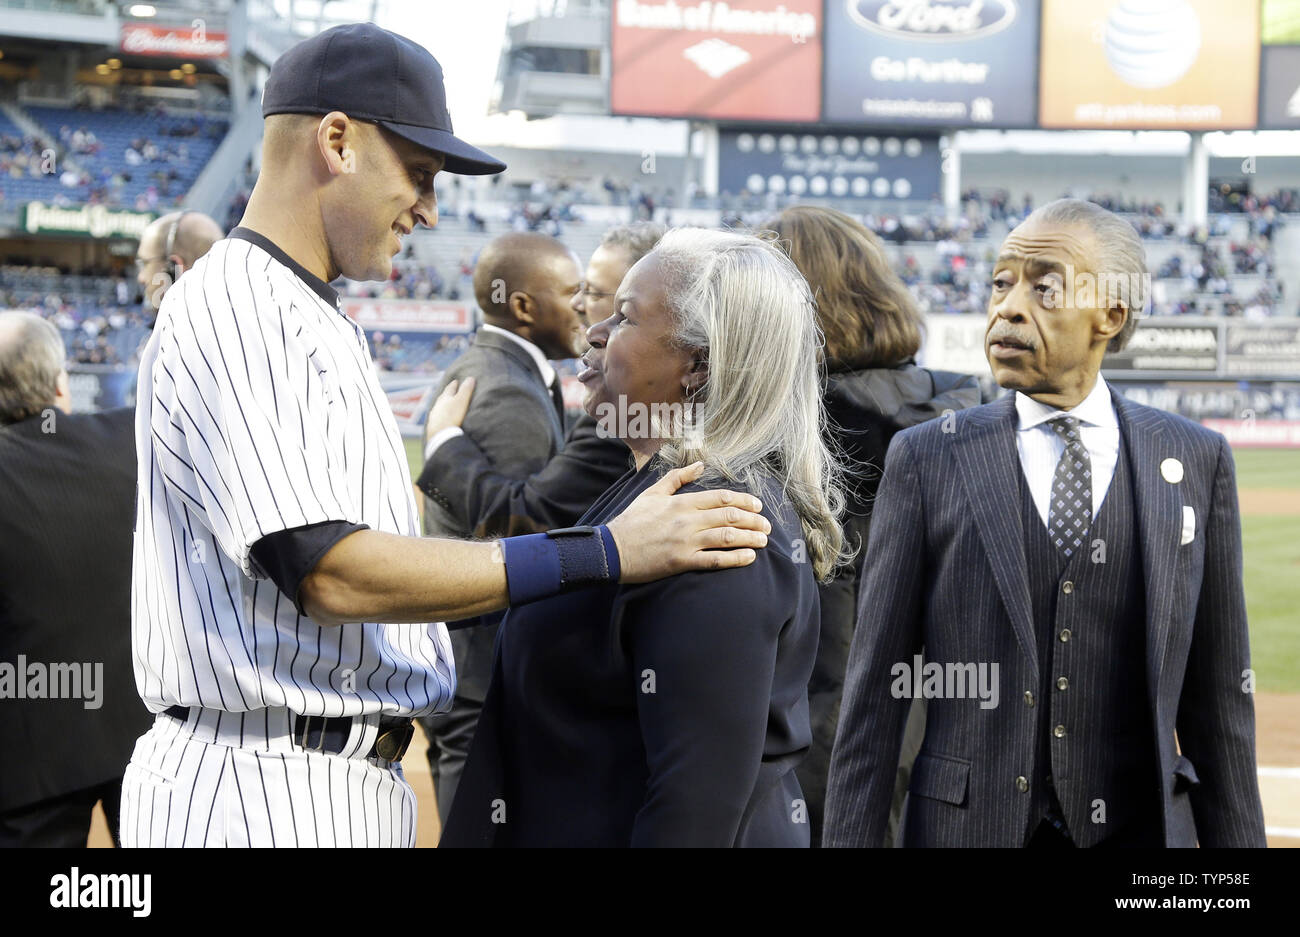 Rev. Al Sharpton watches New York Yankees Derek Jeter exchange words with Sharon Robinson on the field after a plaque is unveiled in Monument Park honoring the late South African President Nelson Mandela on Jackie Robinson Day in game 2 of a double header against the Chicago Cubs at Yankee Stadium in New York City on April 16, 2014. UPI/John Angelillo Stock Photo